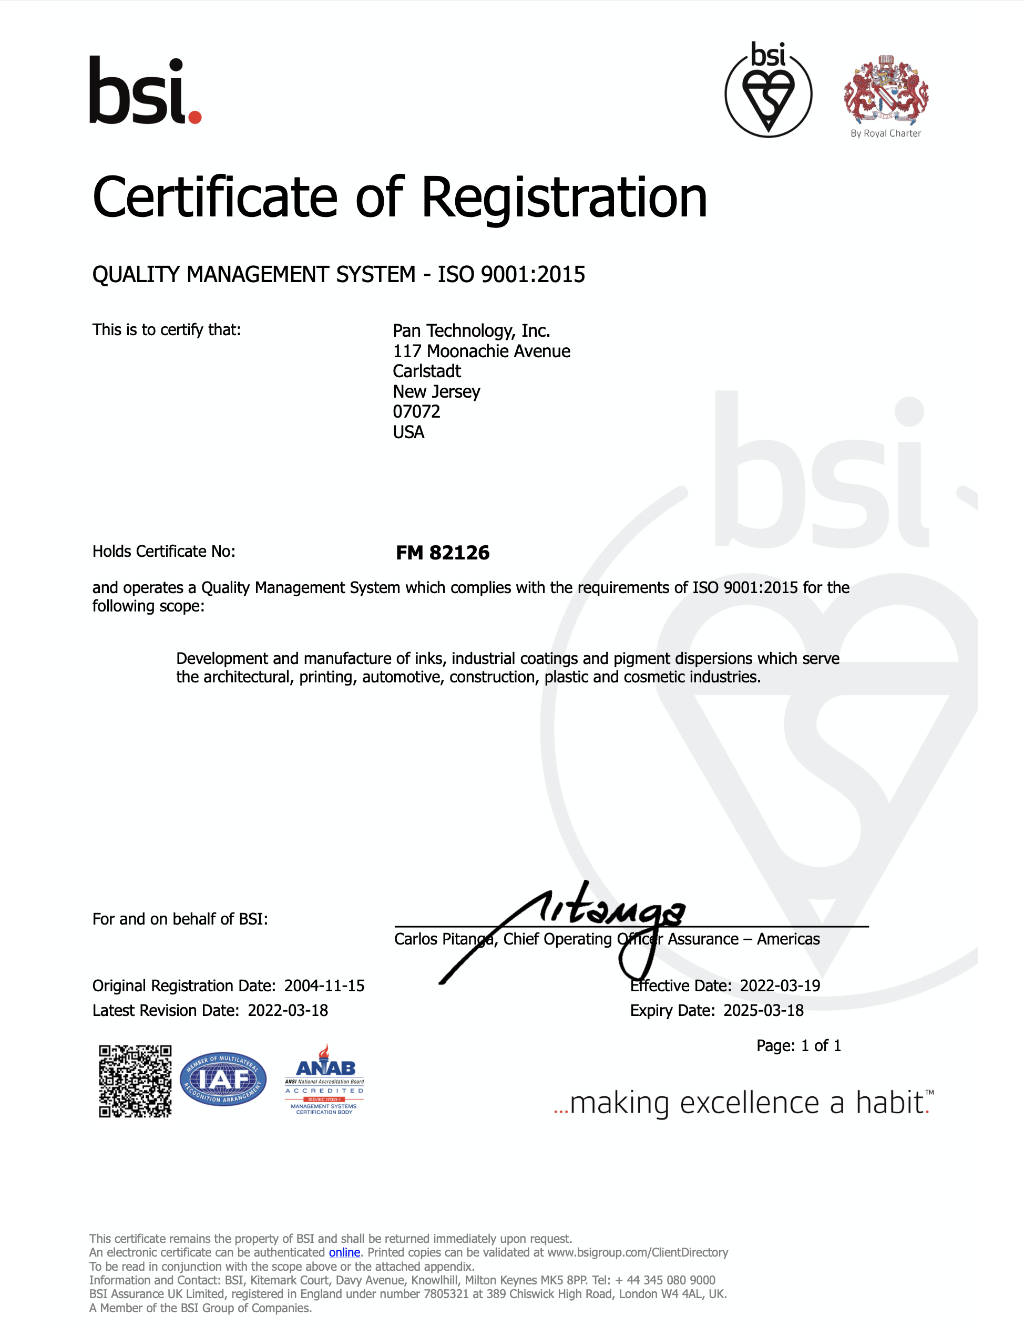 PAN Technology is a certified ISO 900:2008 supplier.